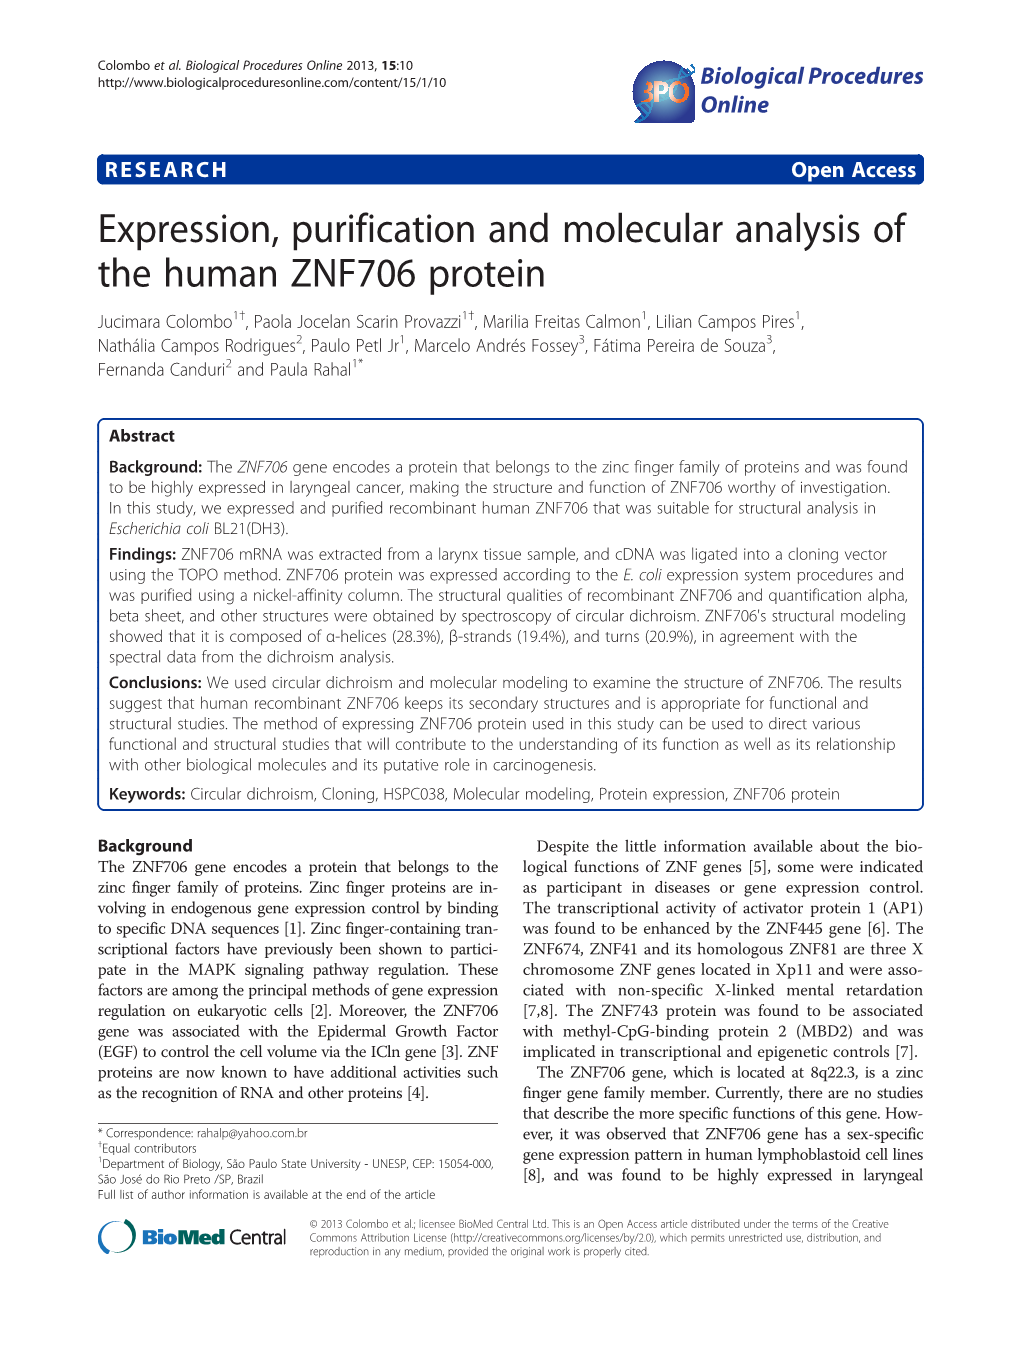 Expression, Purification and Molecular Analysis of the Human ZNF706